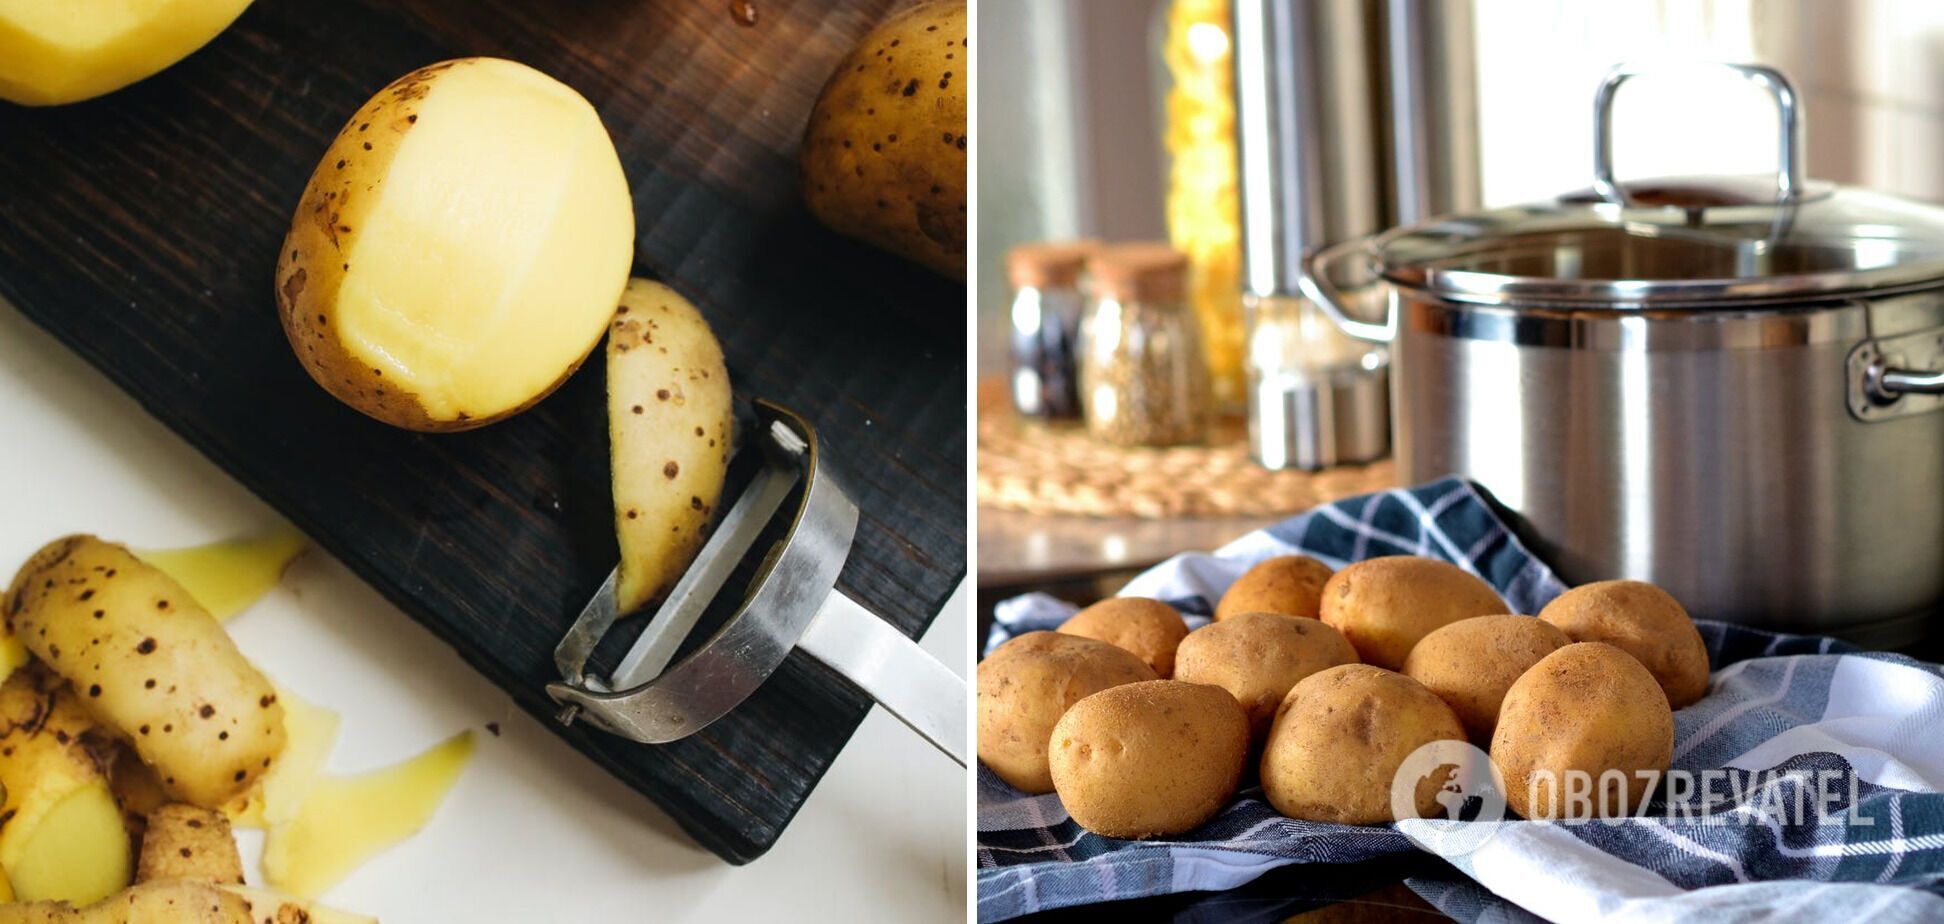 What ingredient to add to potatoes to make them crispy: a simple idea